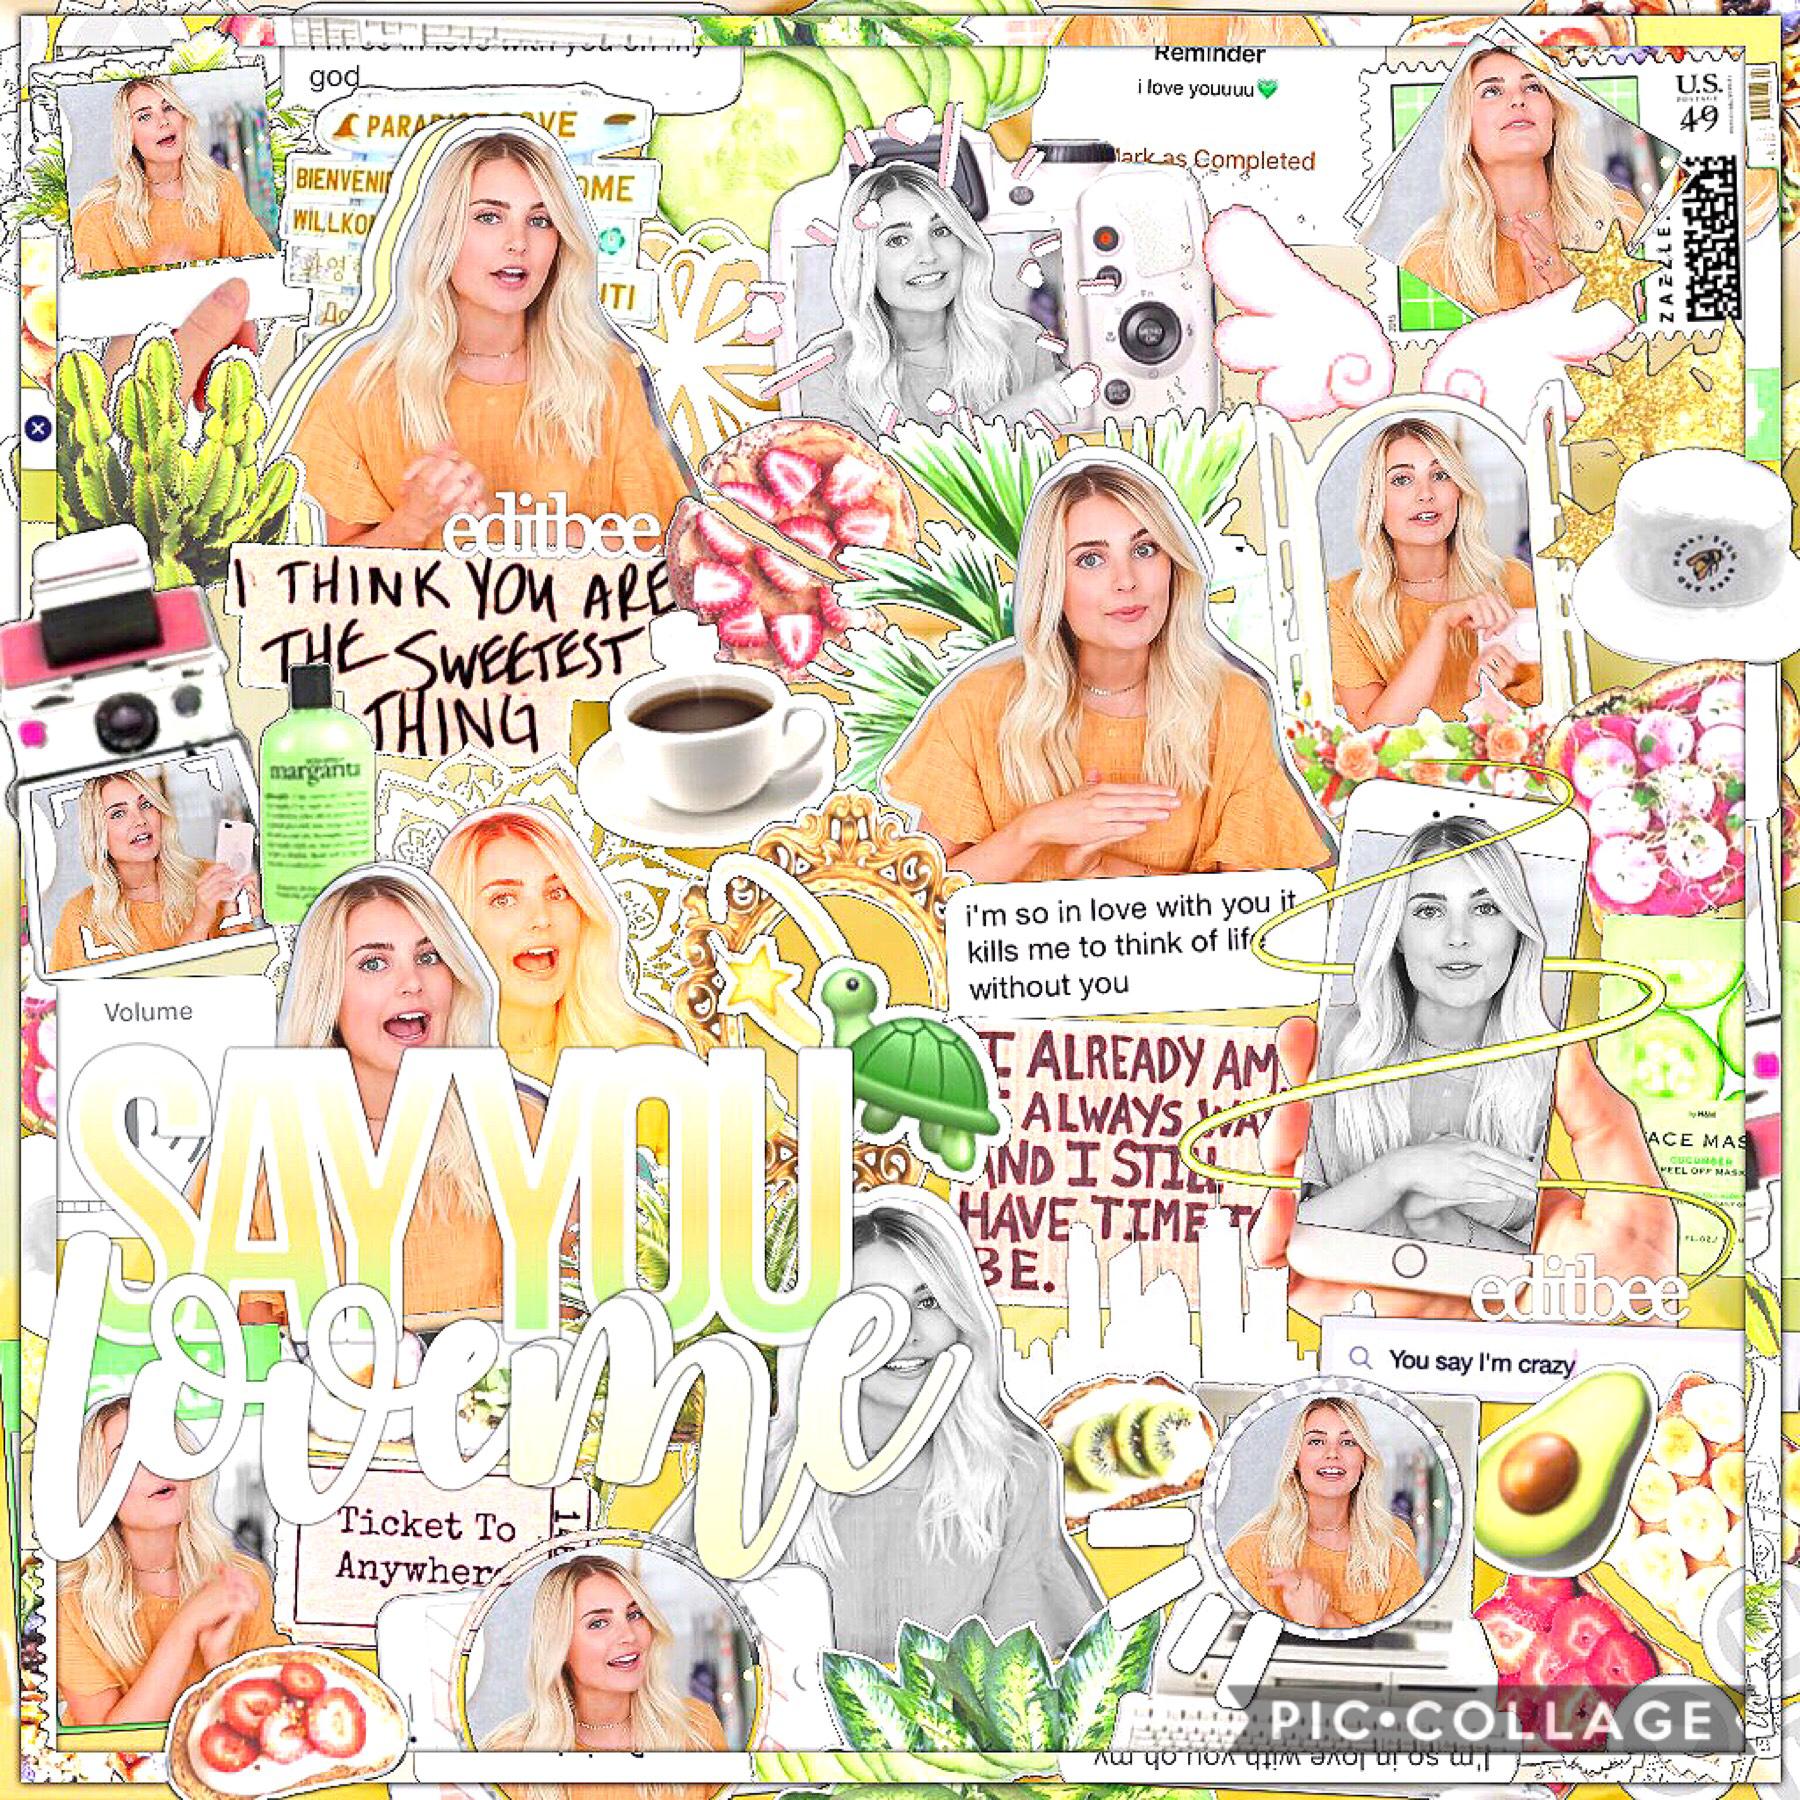 alohaa ! 🌤 here's a lil aspyn edit for y'all💛 I haven't edited aspyn in YEARS omg 🍊 but I love these colors ! 😍 spam: @editbeespam whi: @editbee